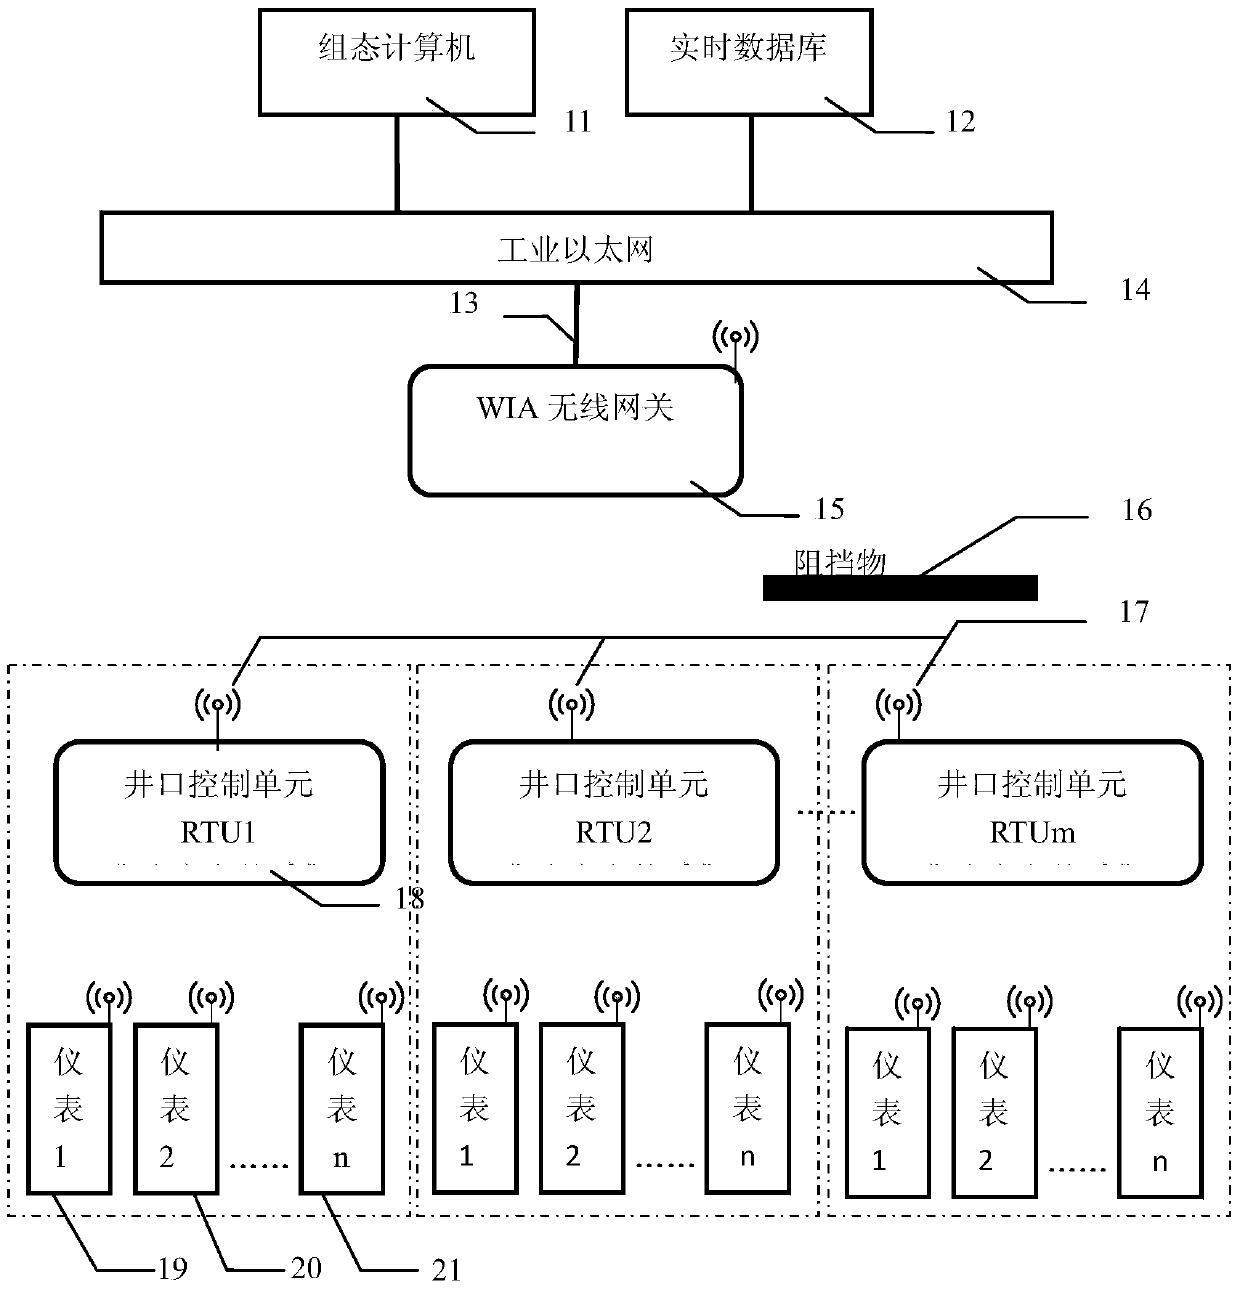 Pumping Well Data Acquisition Control System and Its Method Based on Wireless Network